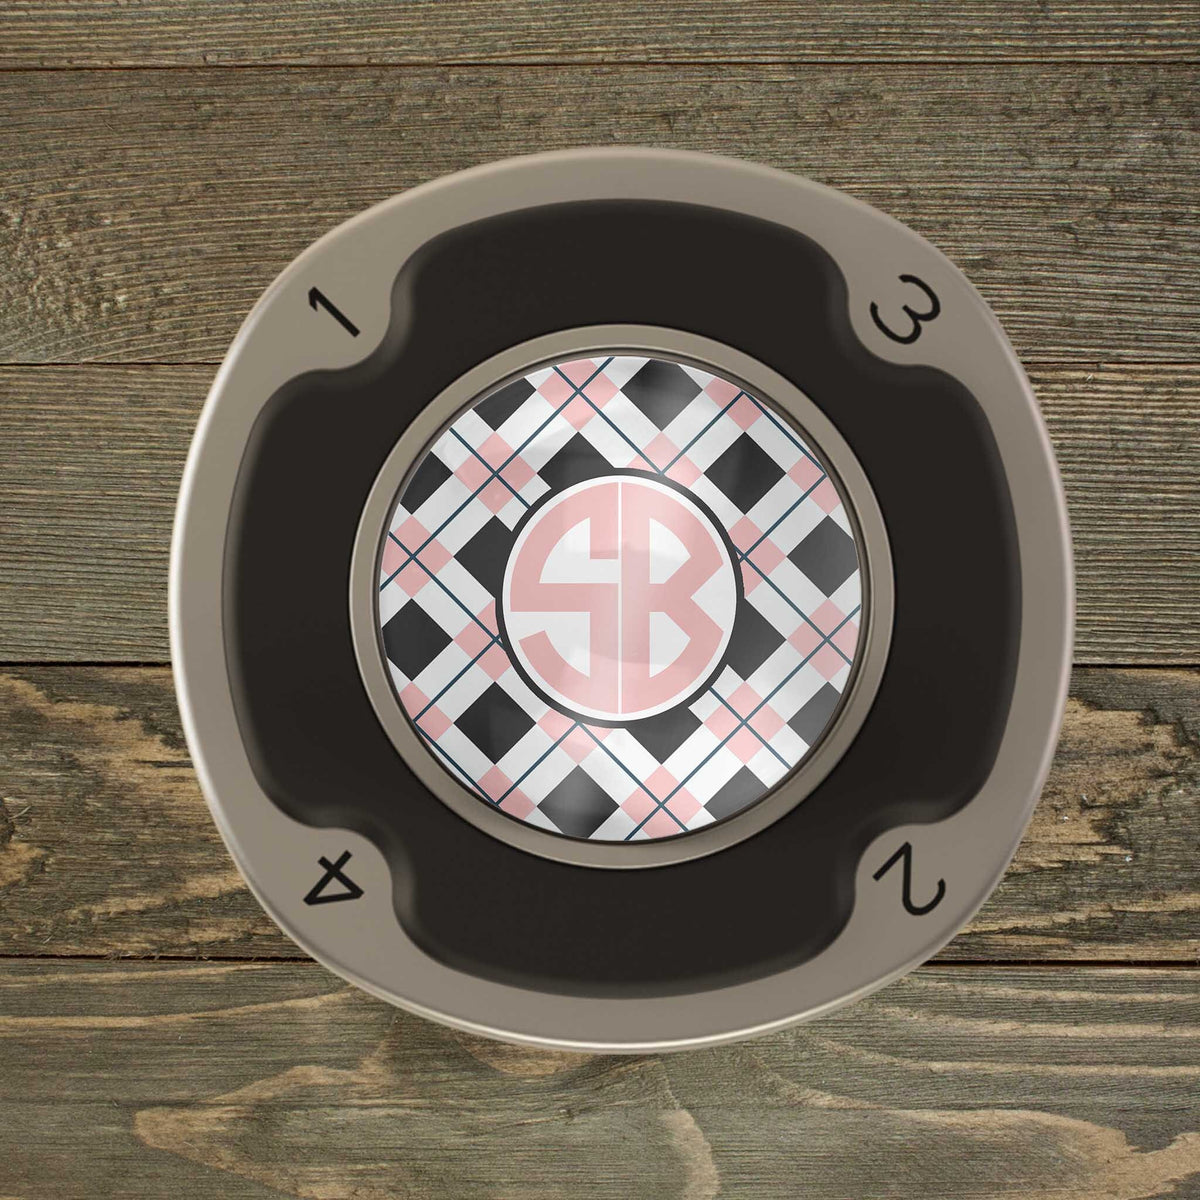 Personalized PitchFix MultiMarker Tool | Custom Ball Markers | Golf Gifts | Blush Argyle